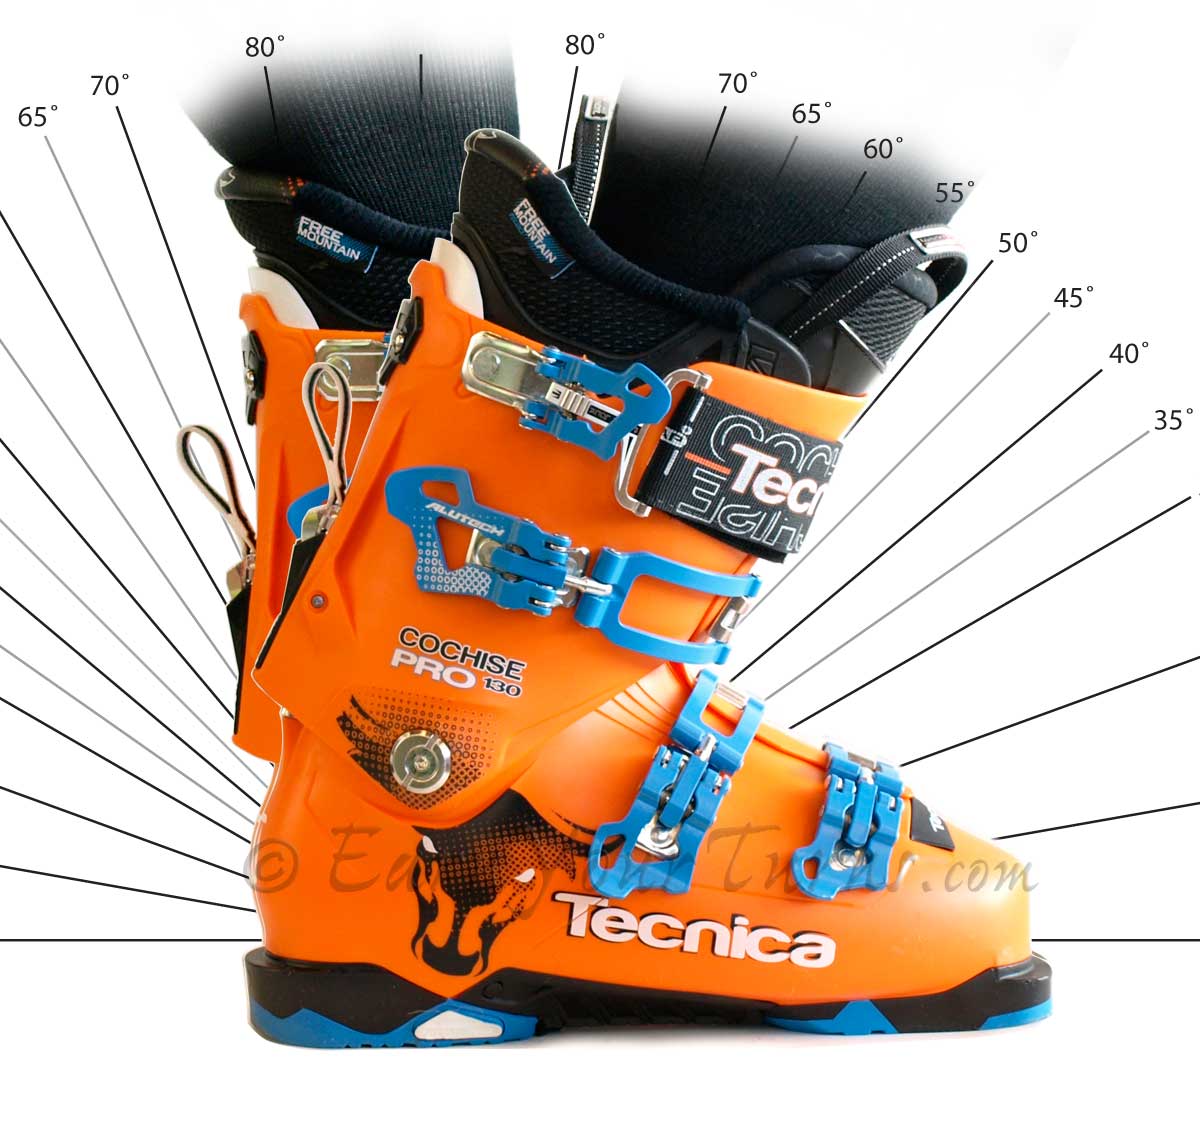 Boot Review: Tecnica upgrades Cochise for 2015 - EarnYourTurns